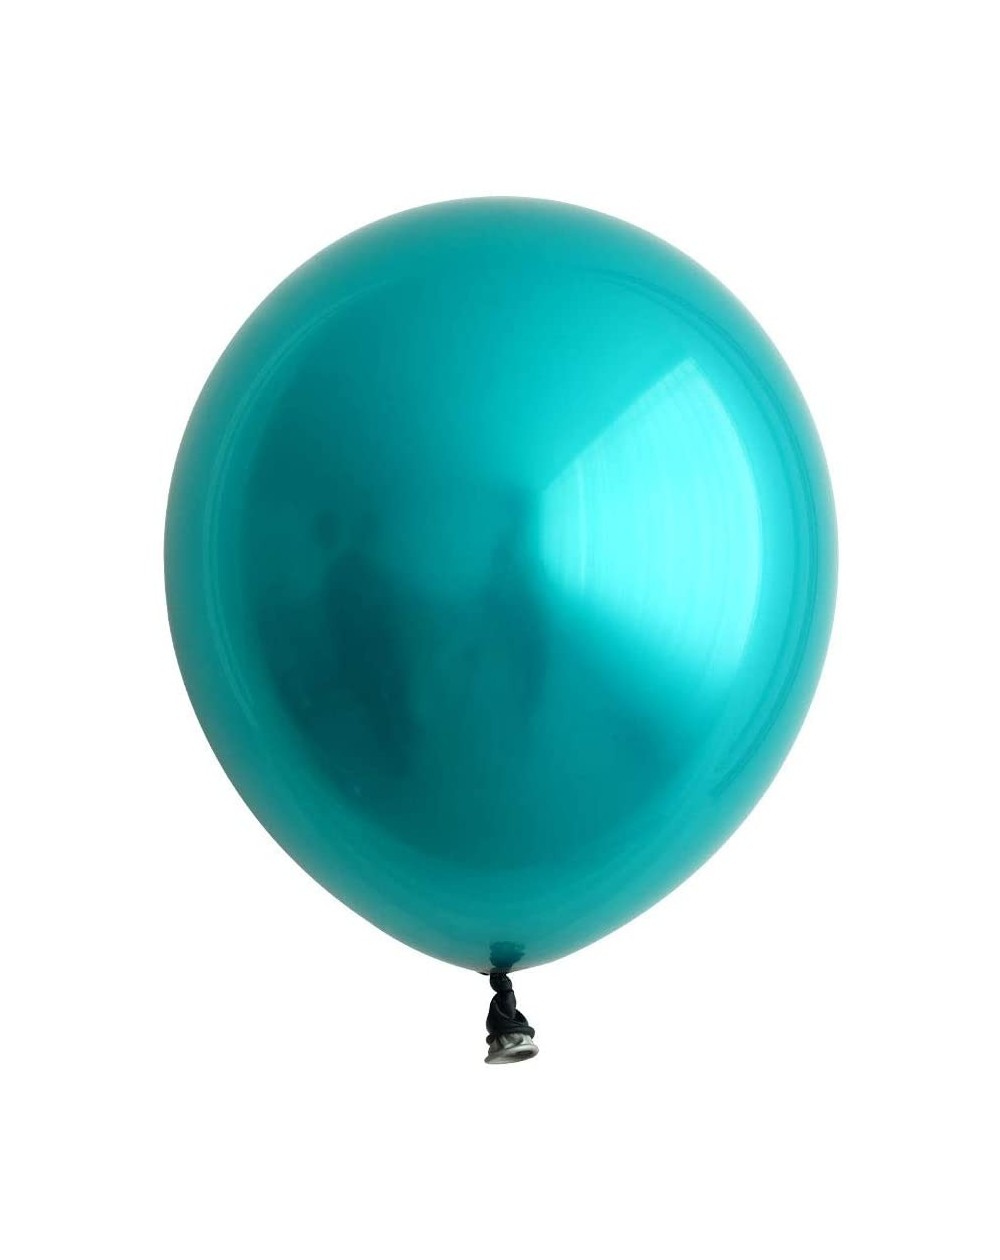 Balloons 30PCS 12inch Turquoise Blue Balloon Double-Stuffed Metallic Teal Blue Balloon Wedding Baby Shower Party Decoration -...